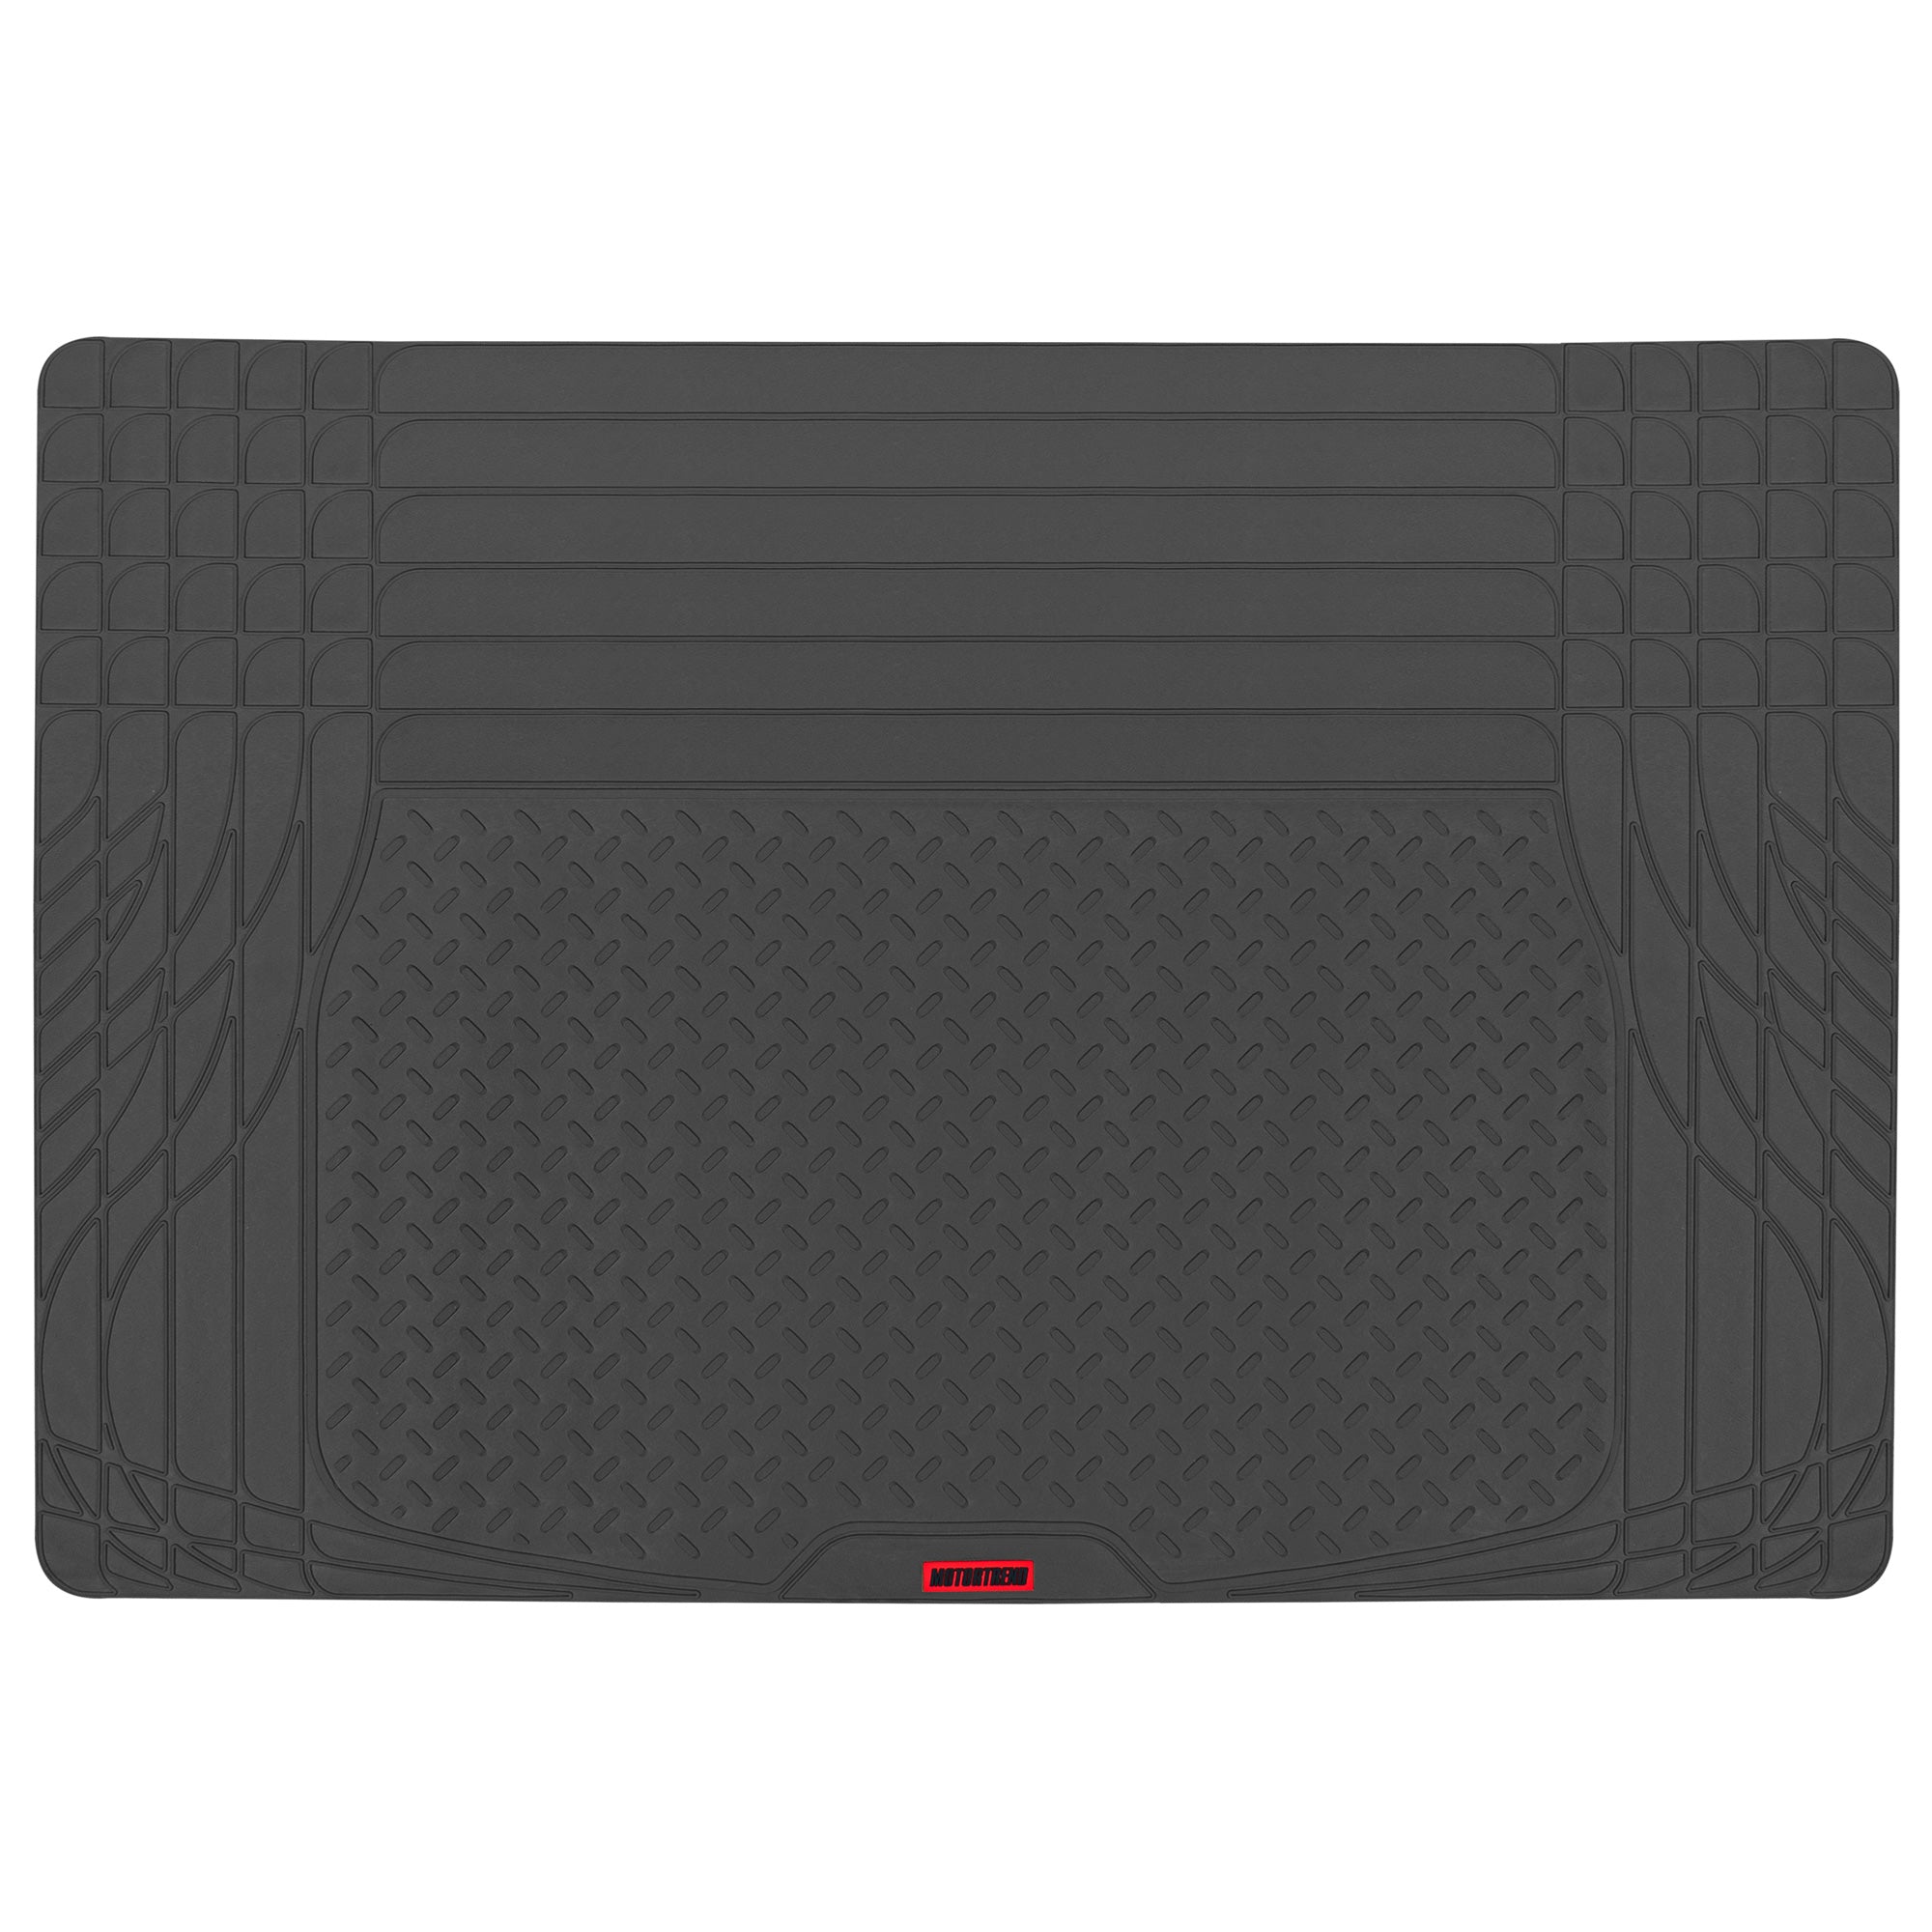 MotorTrend FlexTough TrunkShield Cargo Liner Car Mat for Back of SUV, Sedan & Coupe Trunk Cover, All Weather Heavy Duty Protection, Trim-to-Fit, 47.5" x 32.2"in